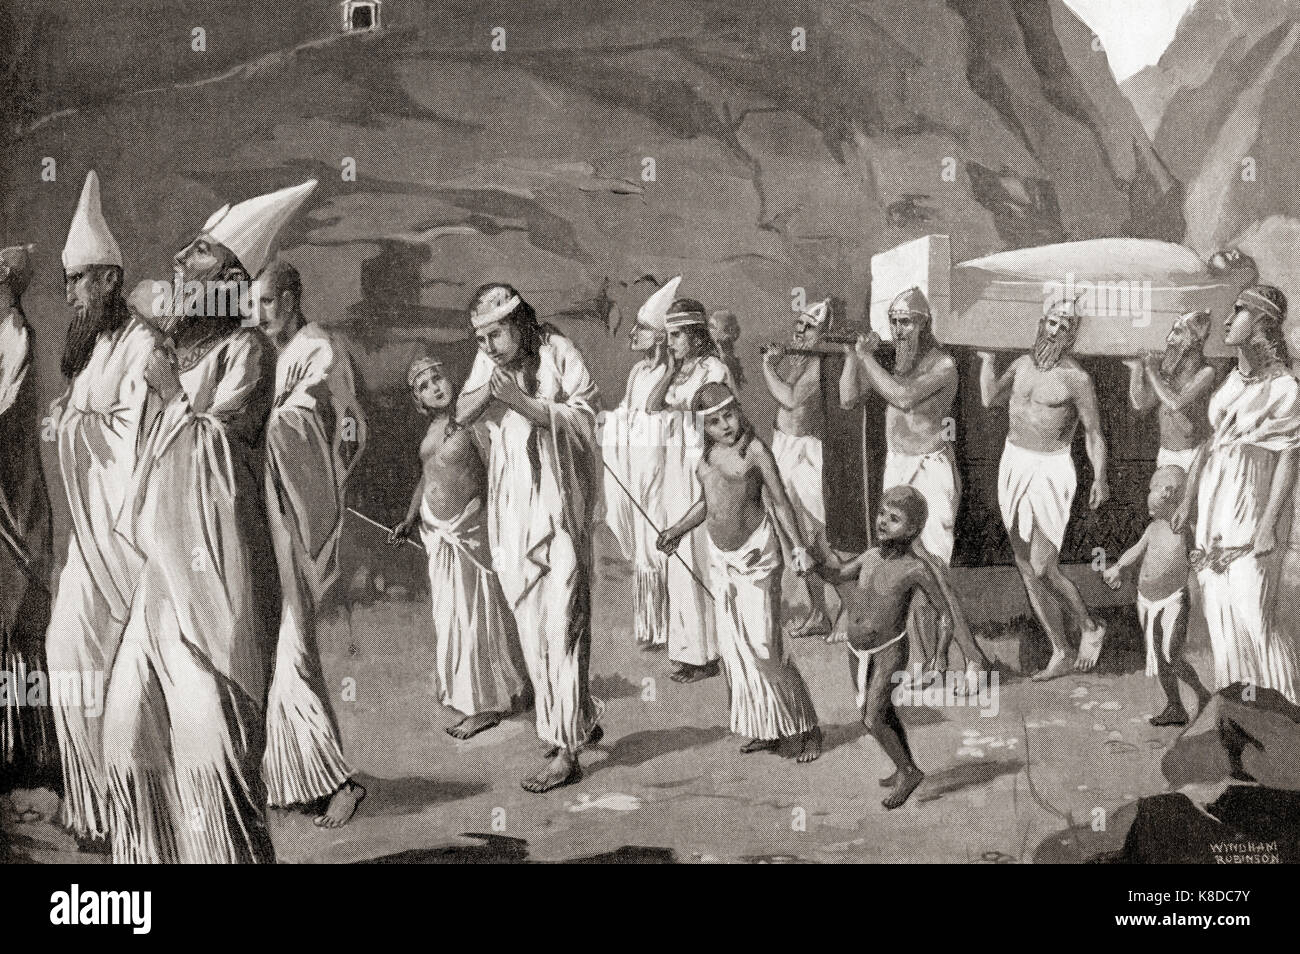 A Phoenician funeral procession. From Hutchinson's History of the Nations, published 1915. Stock Photo